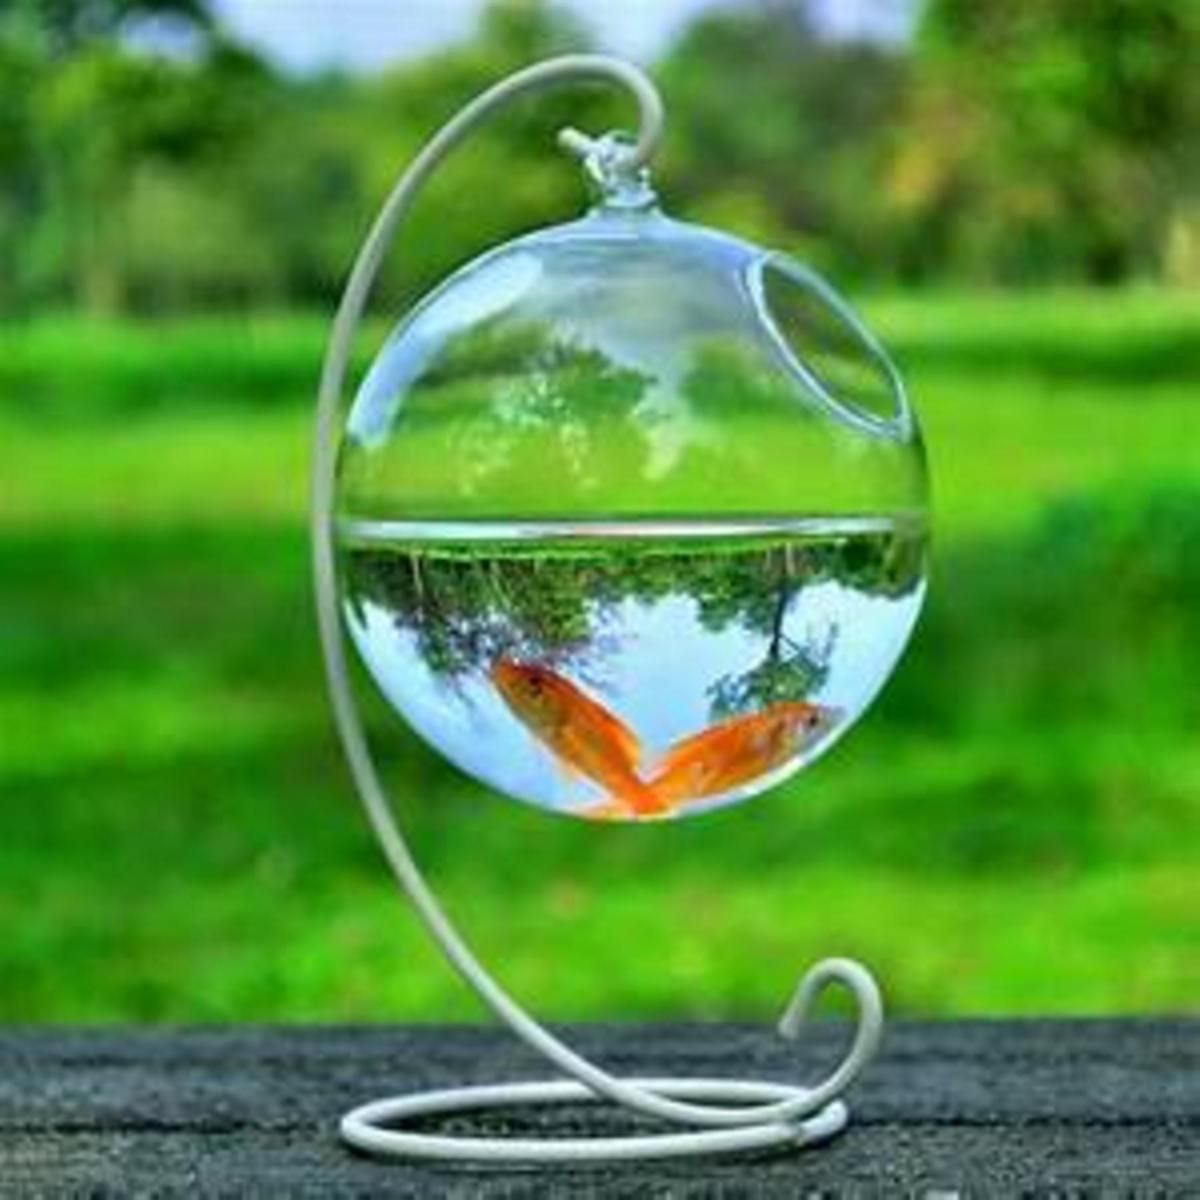 different-types-of-aquariums-for-your-home